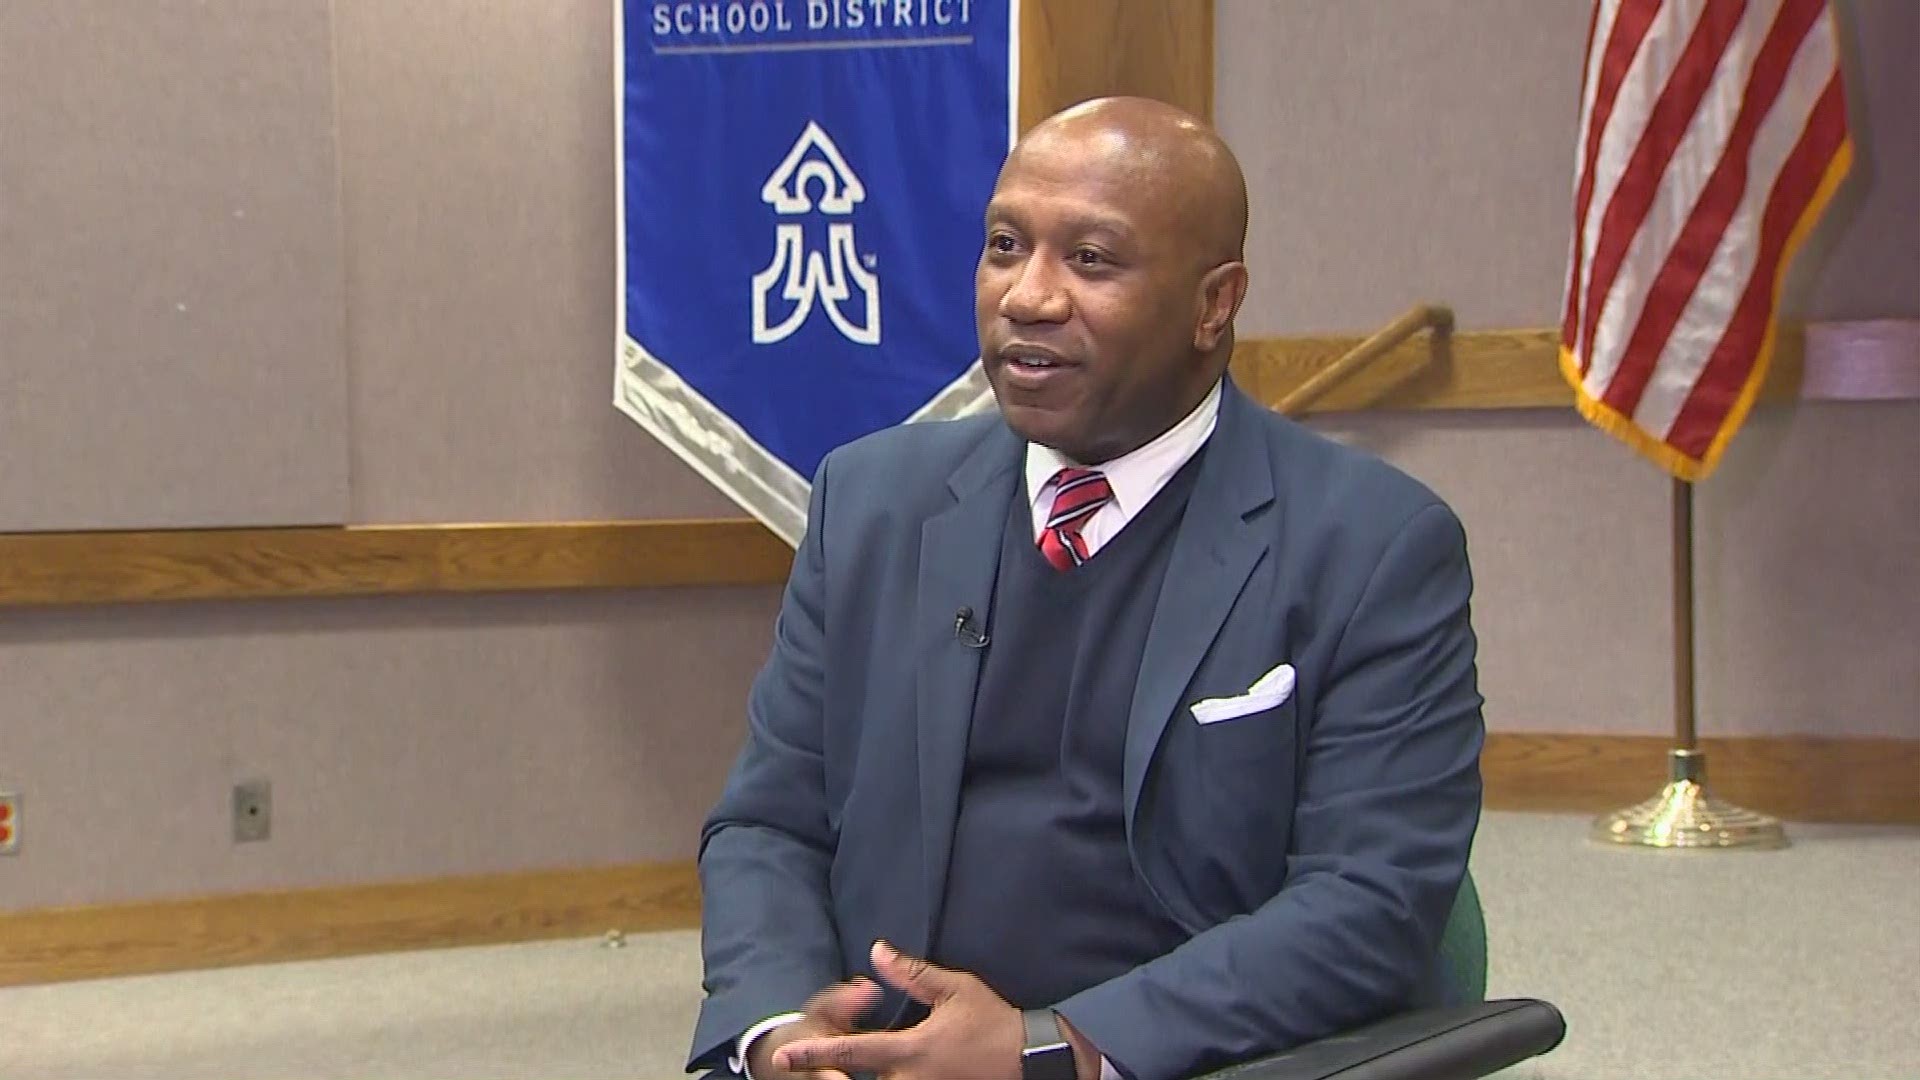 KING 5 sits down with Superintendent Dr. Calvin Watts.